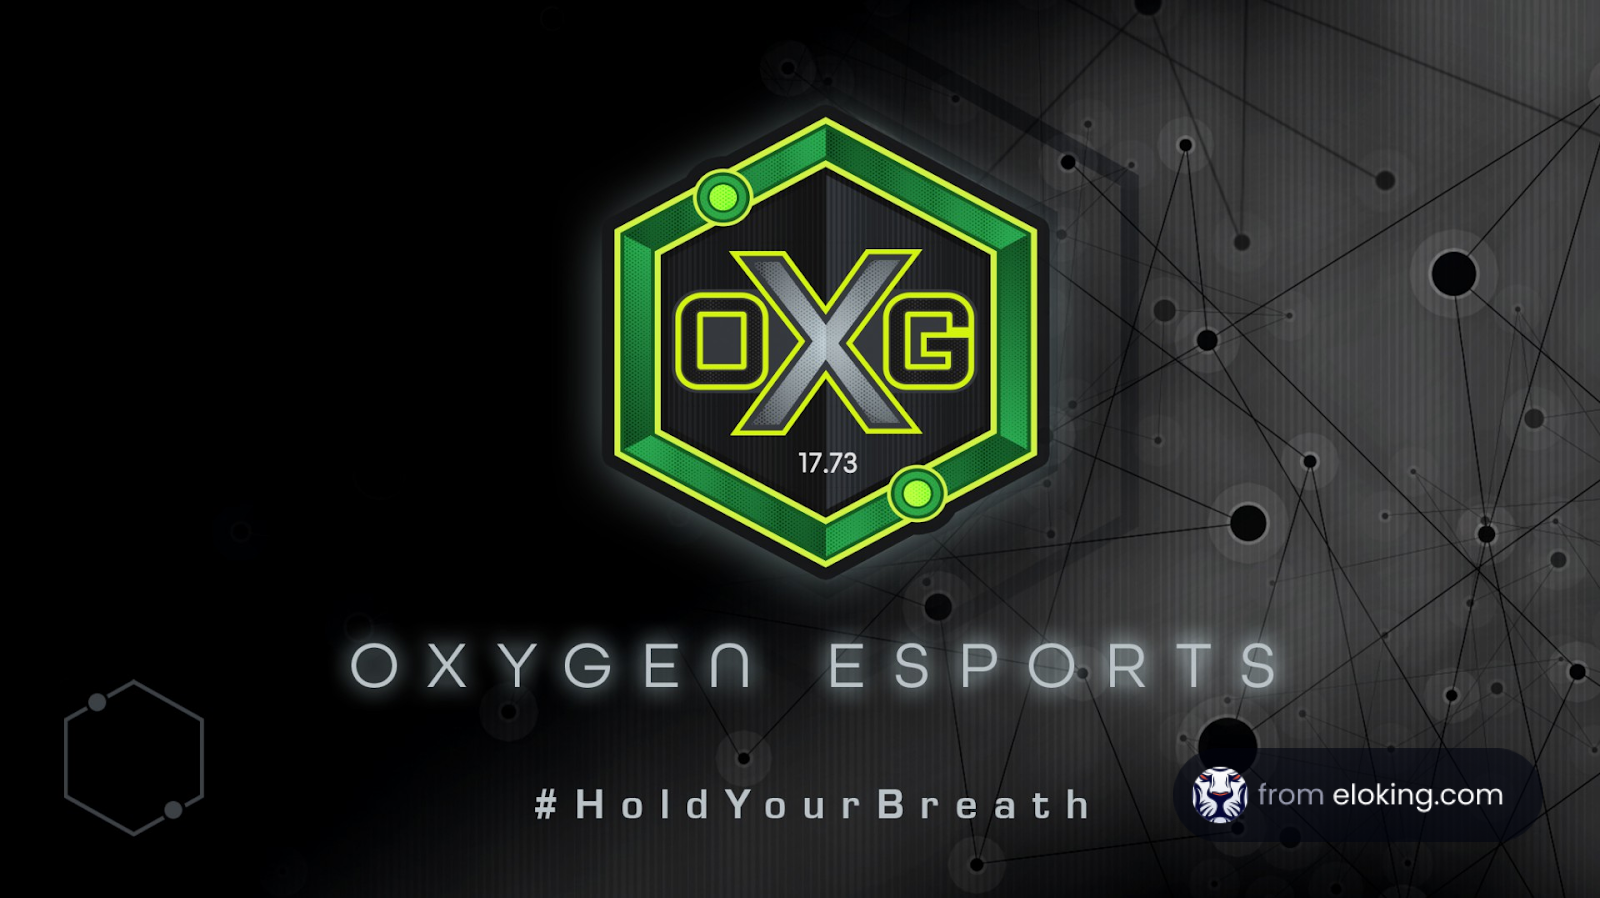 Graphic visual of Oxygen Esports logo with a green hexagon and futuristic background